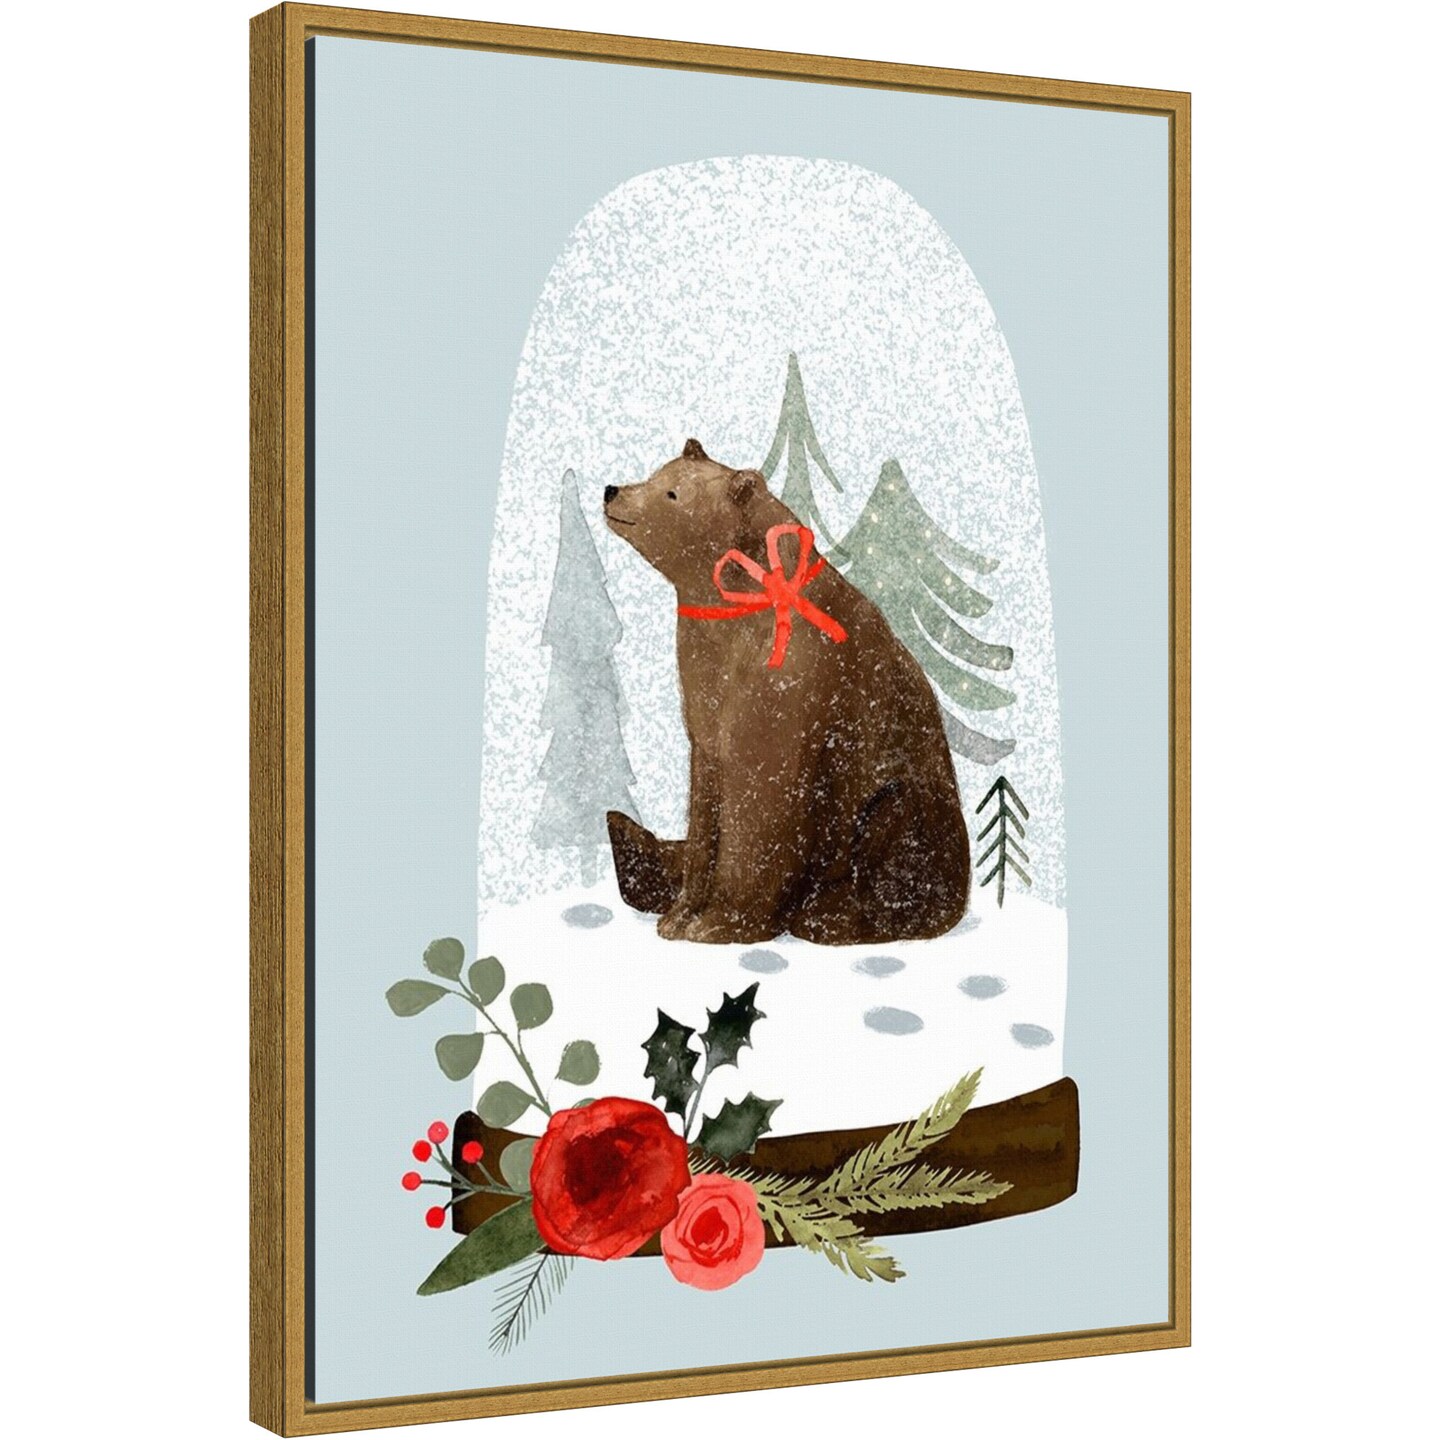 Snow Globe Village IV Bear by Victoria Barnes 18-in. W x 24-in. H. Canvas Wall Art Print Framed in Gold